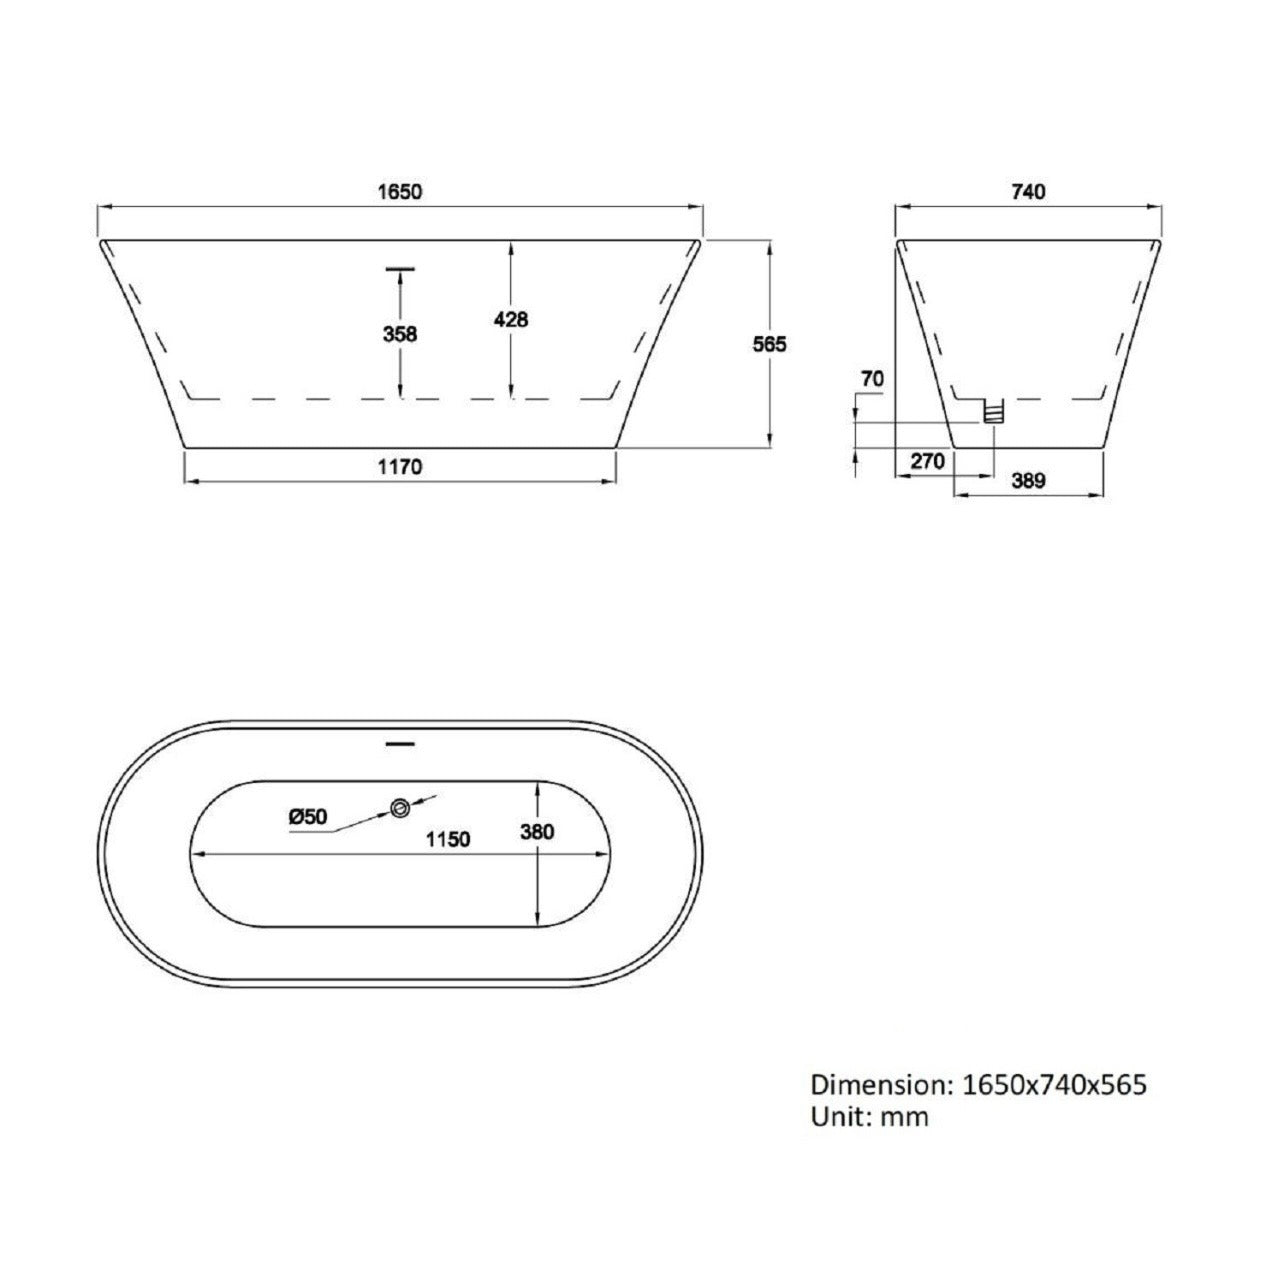 Double Ended Bath Curved and Freestanding